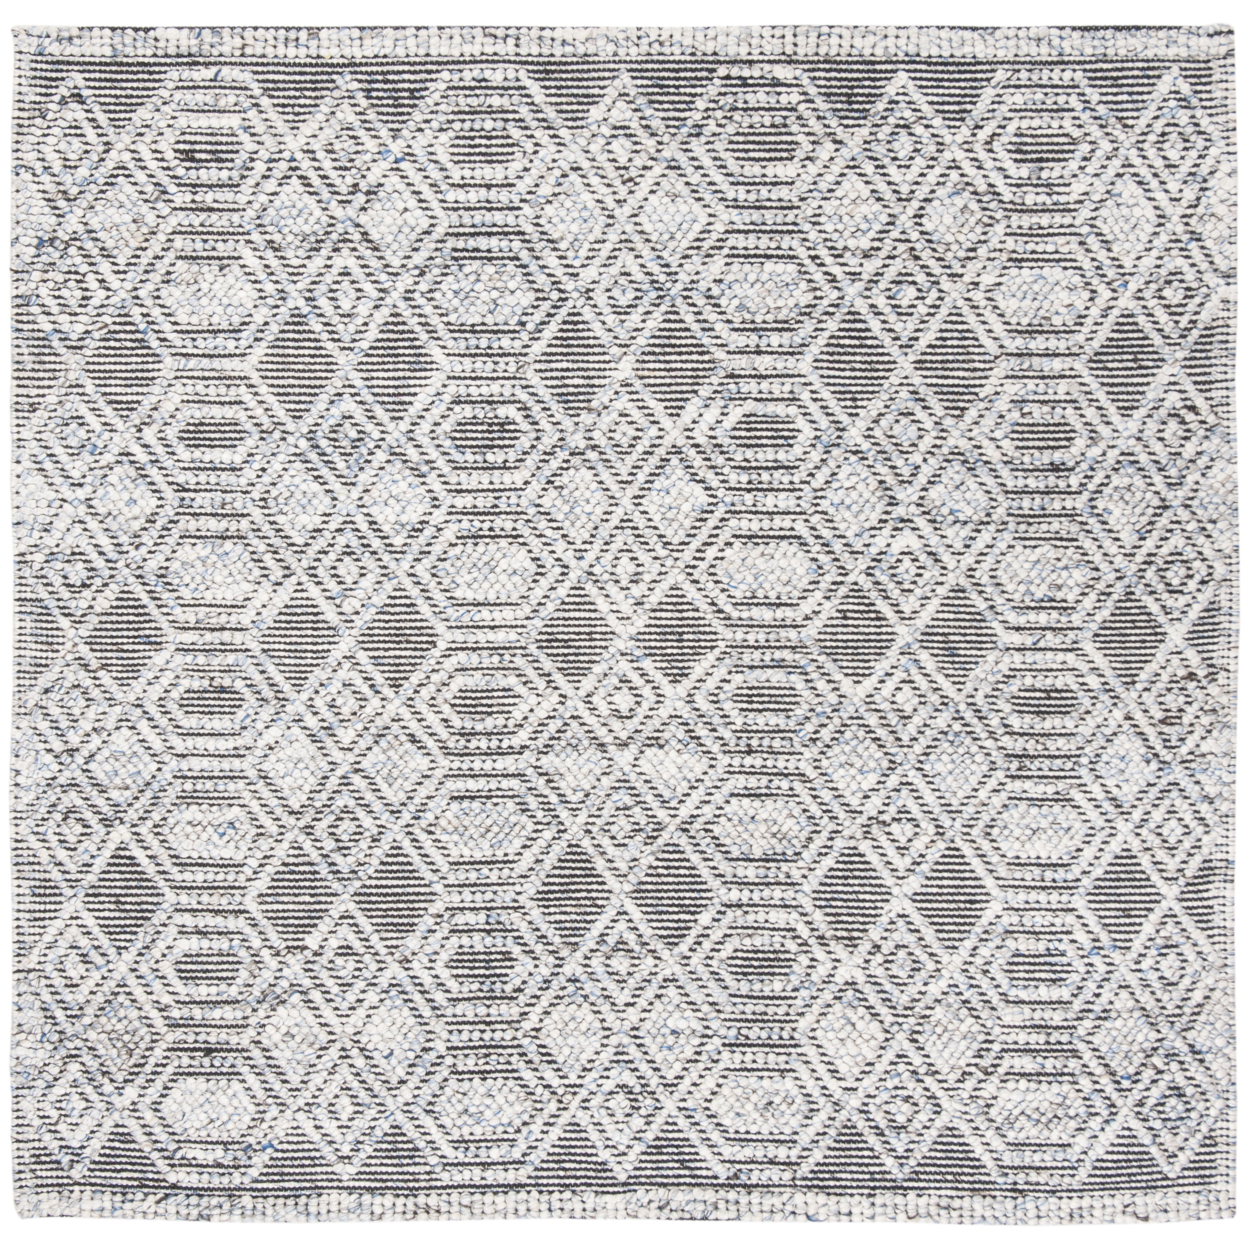 SAFAVIEH Natura Collection NAT312M Handwoven Blue Rug - 6' Square